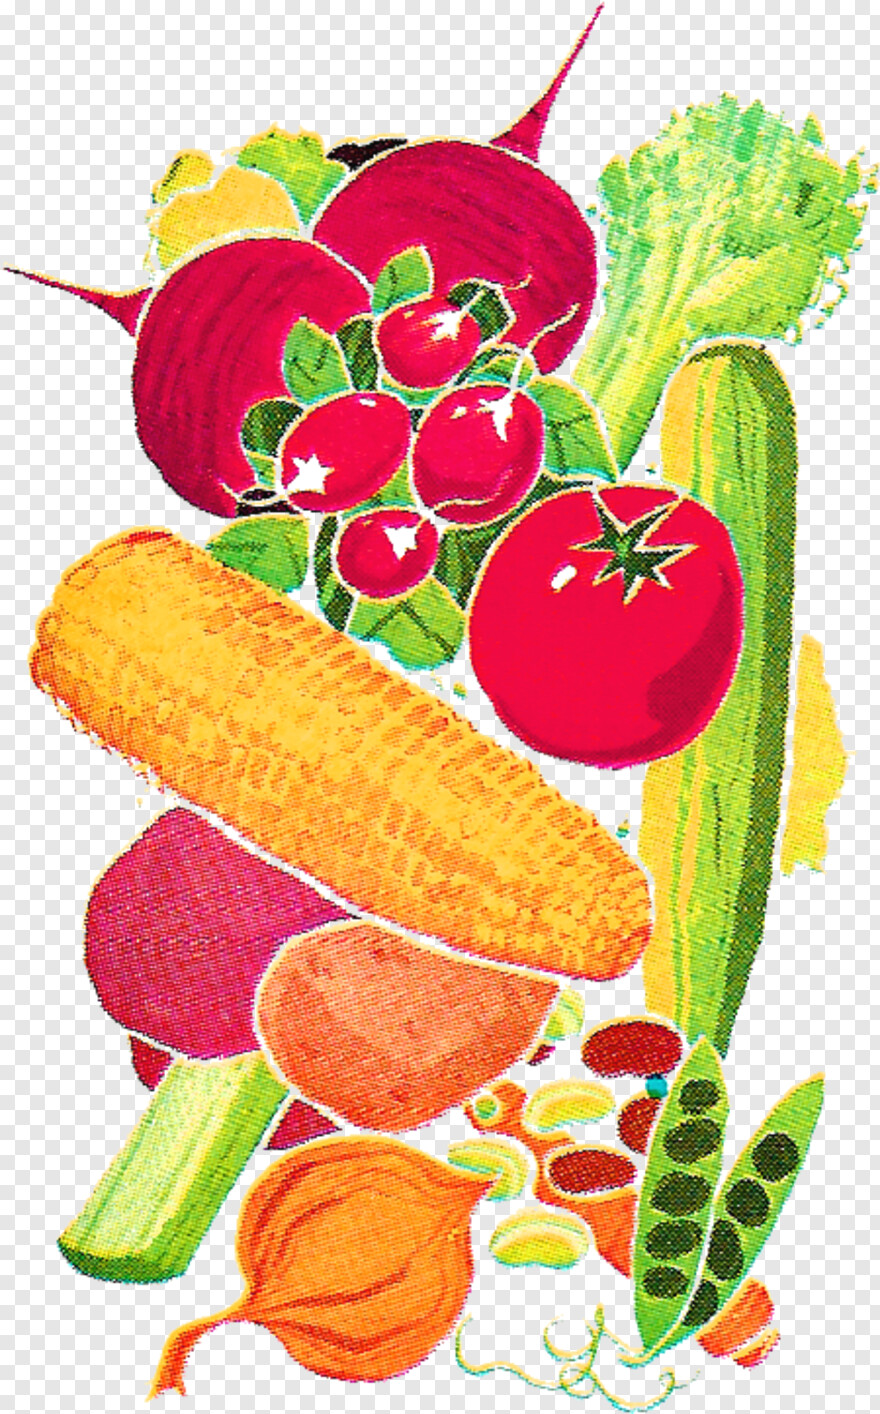 vegetables-icons # 594984